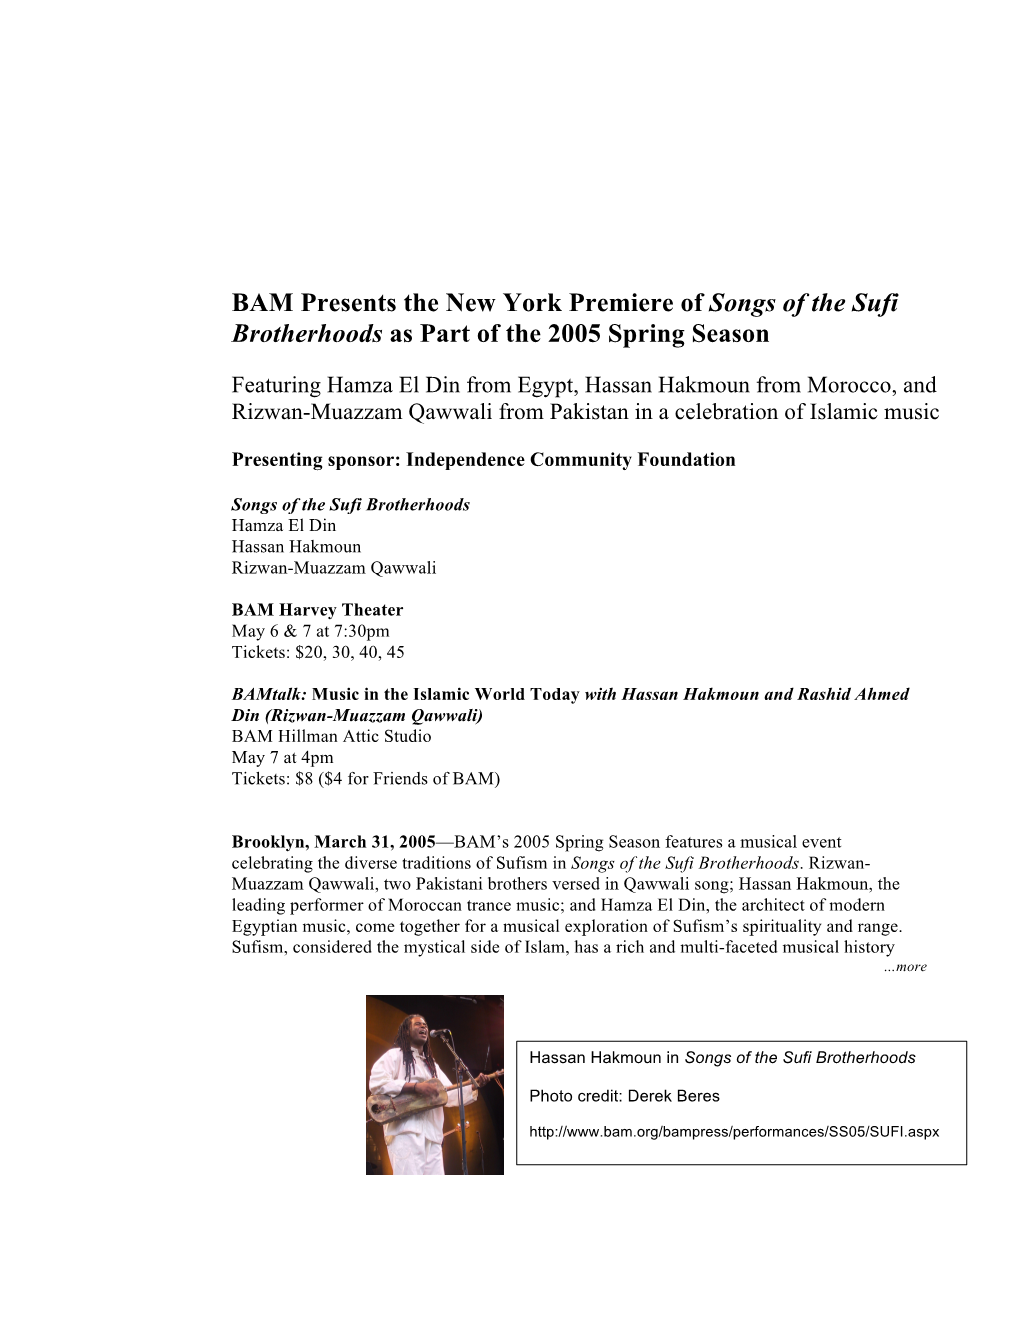 BAM Presents the New York Premiere of Songs of the Sufi Brotherhoods As Part of the 2005 Spring Season